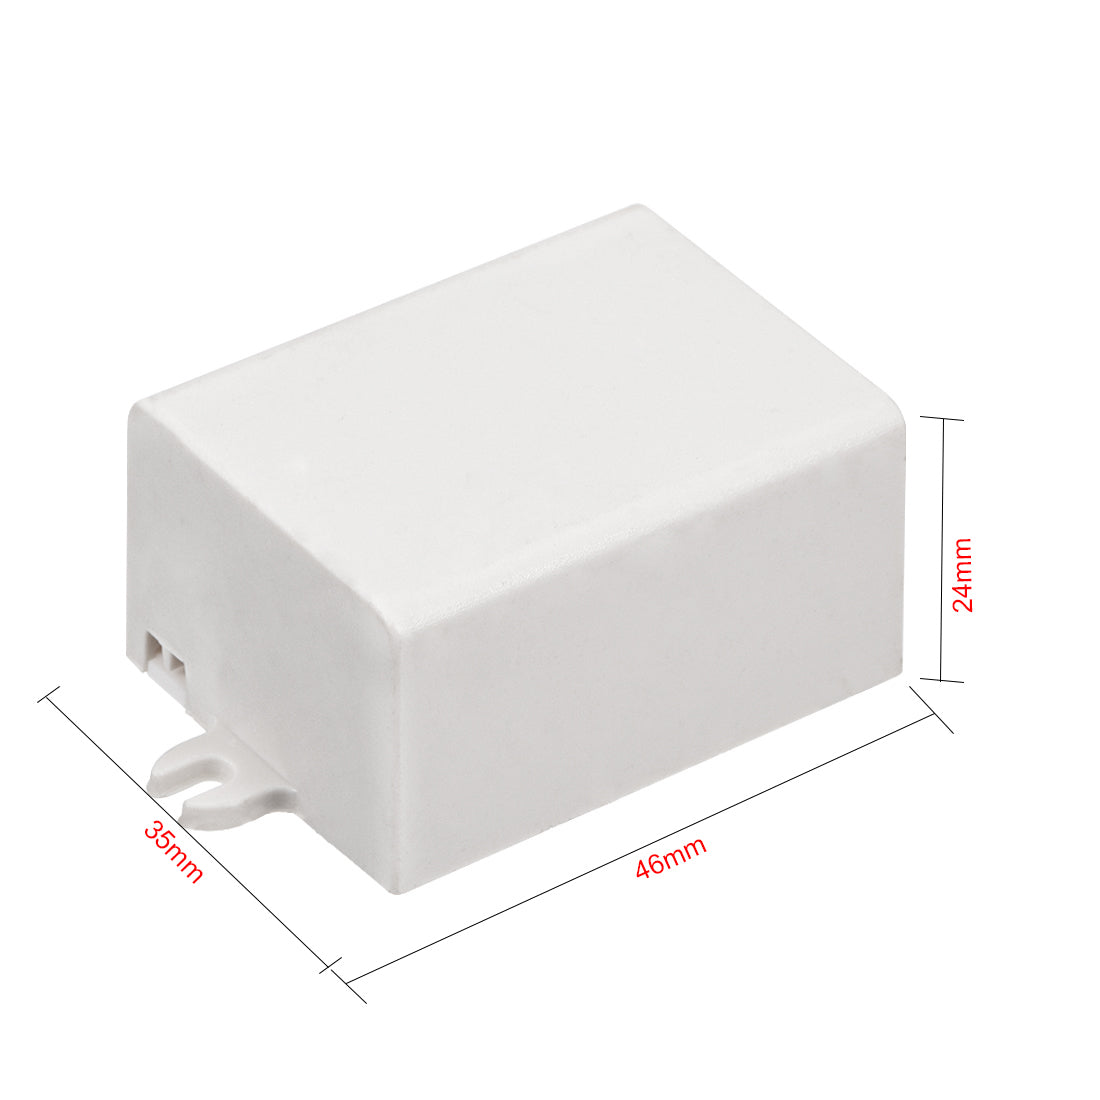 uxcell Uxcell 7Pcs 46 x 35 x 24mm Electronic Plastic DIY Junction Box Enclosure Case White